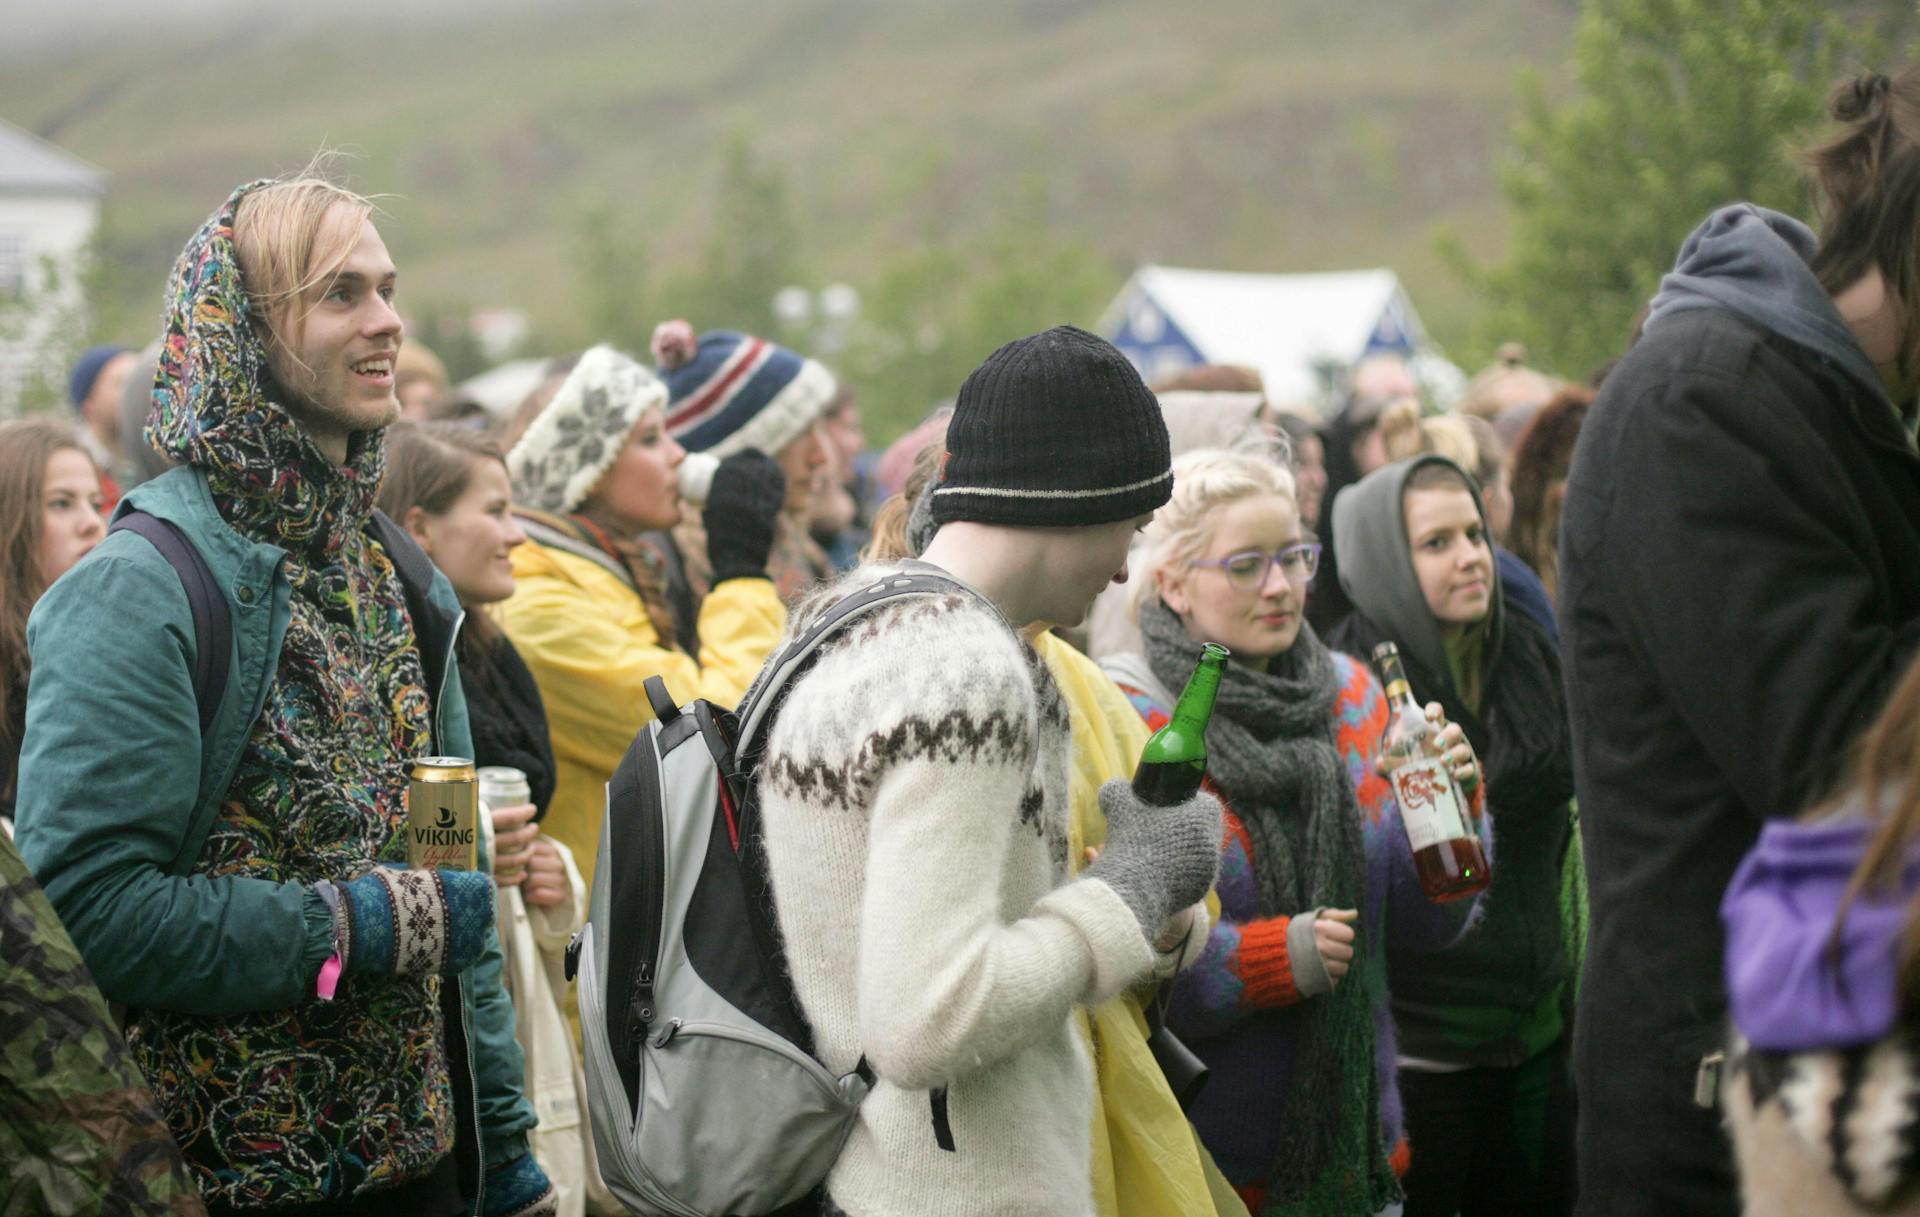 Festival guests at Lunga festival. 